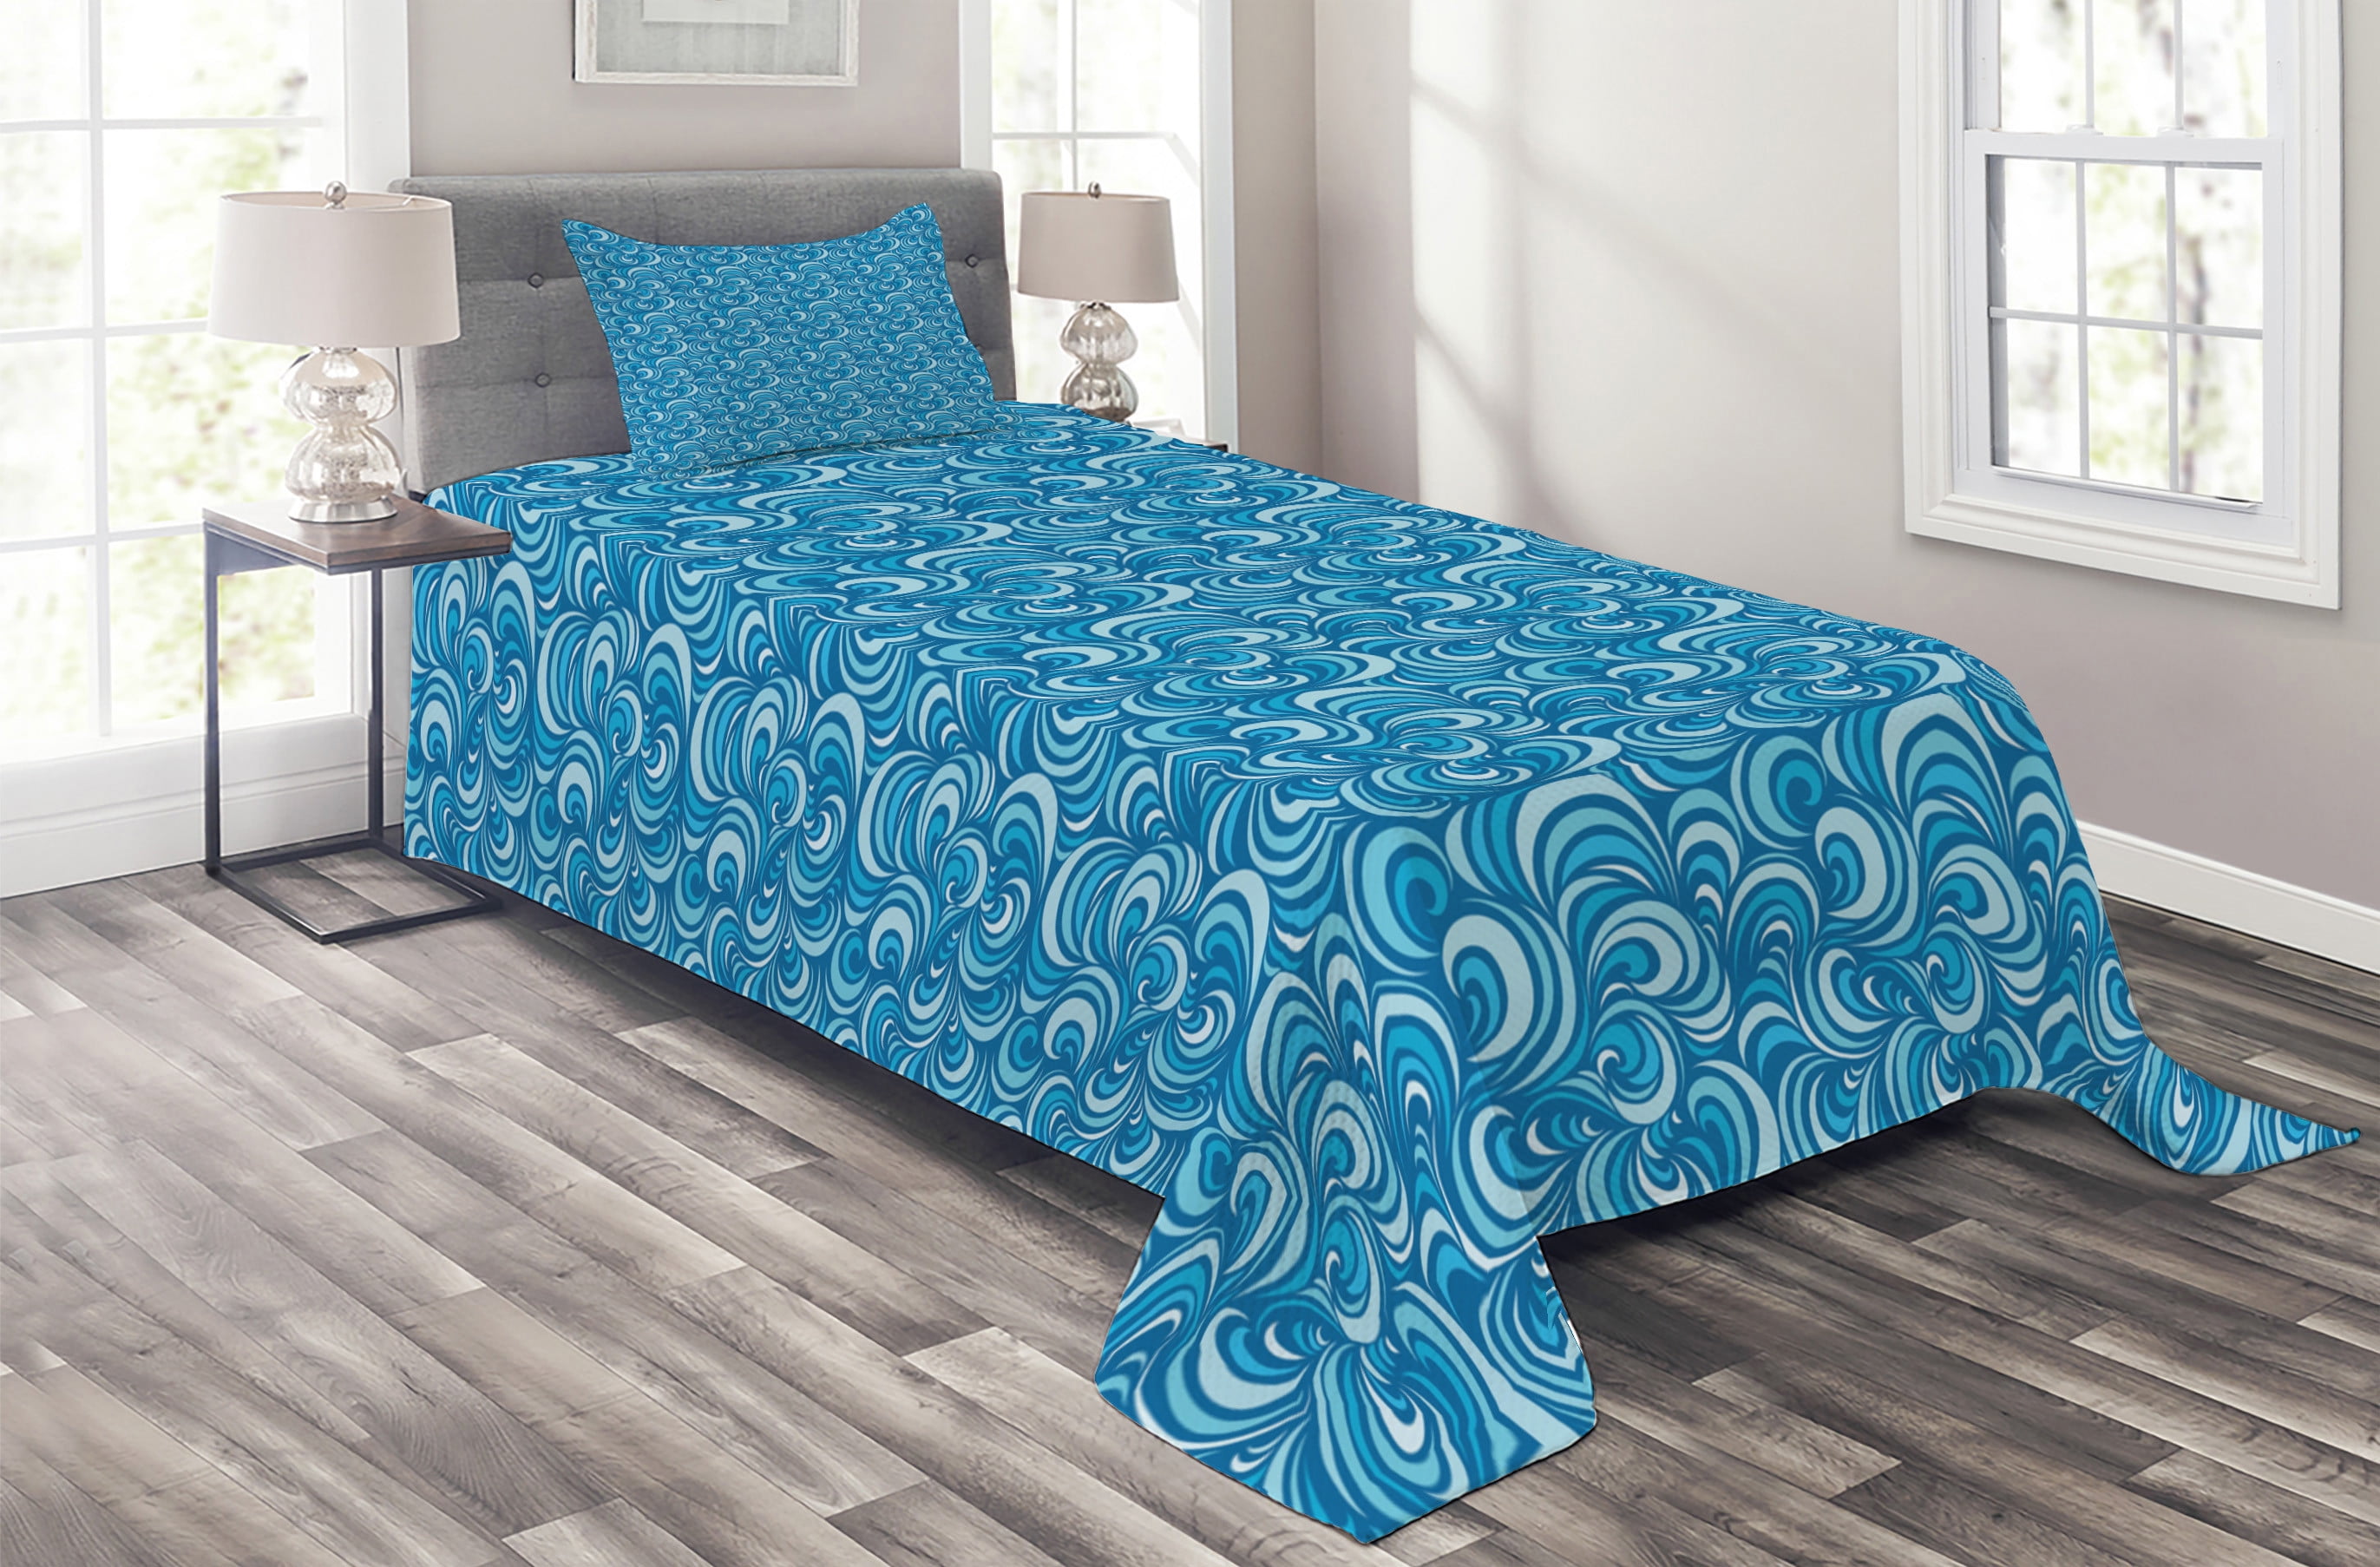 Blue Coverlet Marine Waves Pattern Abstract Curly Forms Spirals Sea